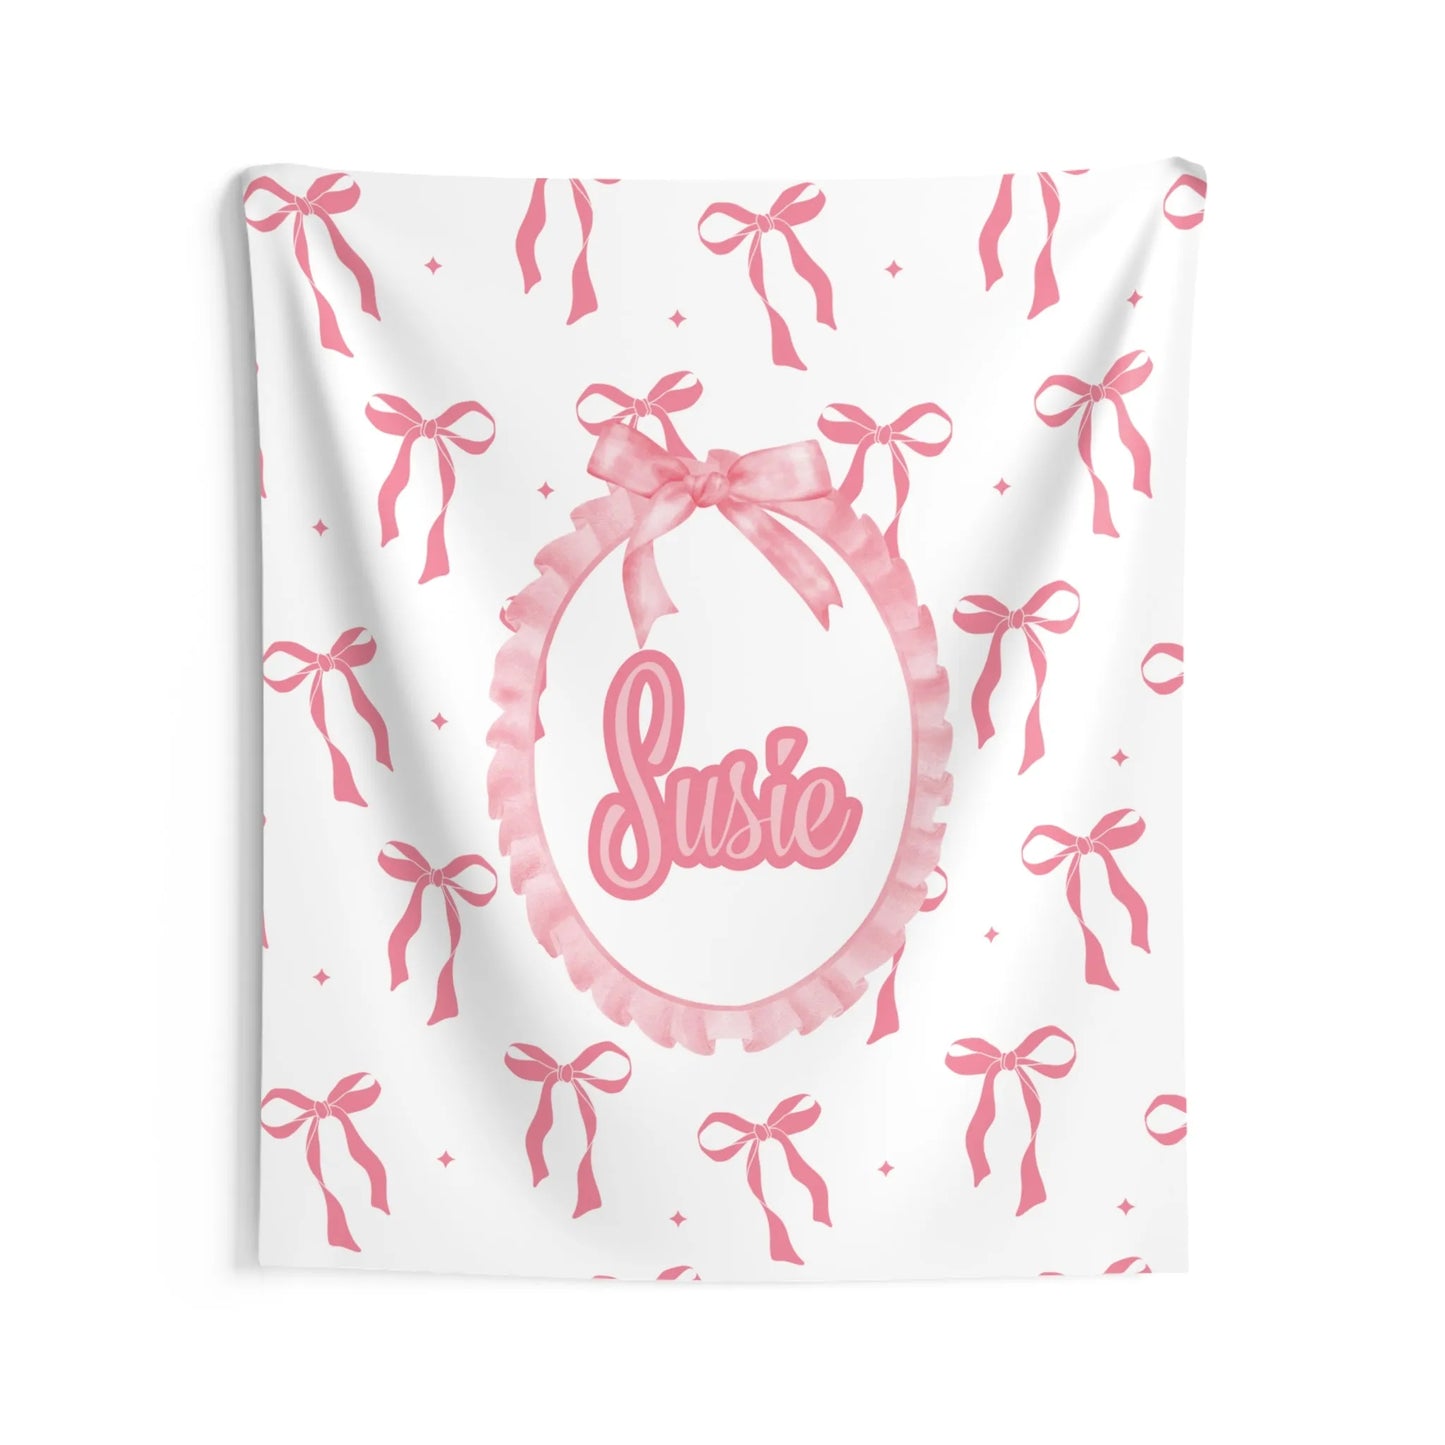 Coquette Bows Custom Name Wall Tapestry - Coquette Aesthetic Wall Banner - Custom Coquette Tapestry - Pink Coquette Home Decor